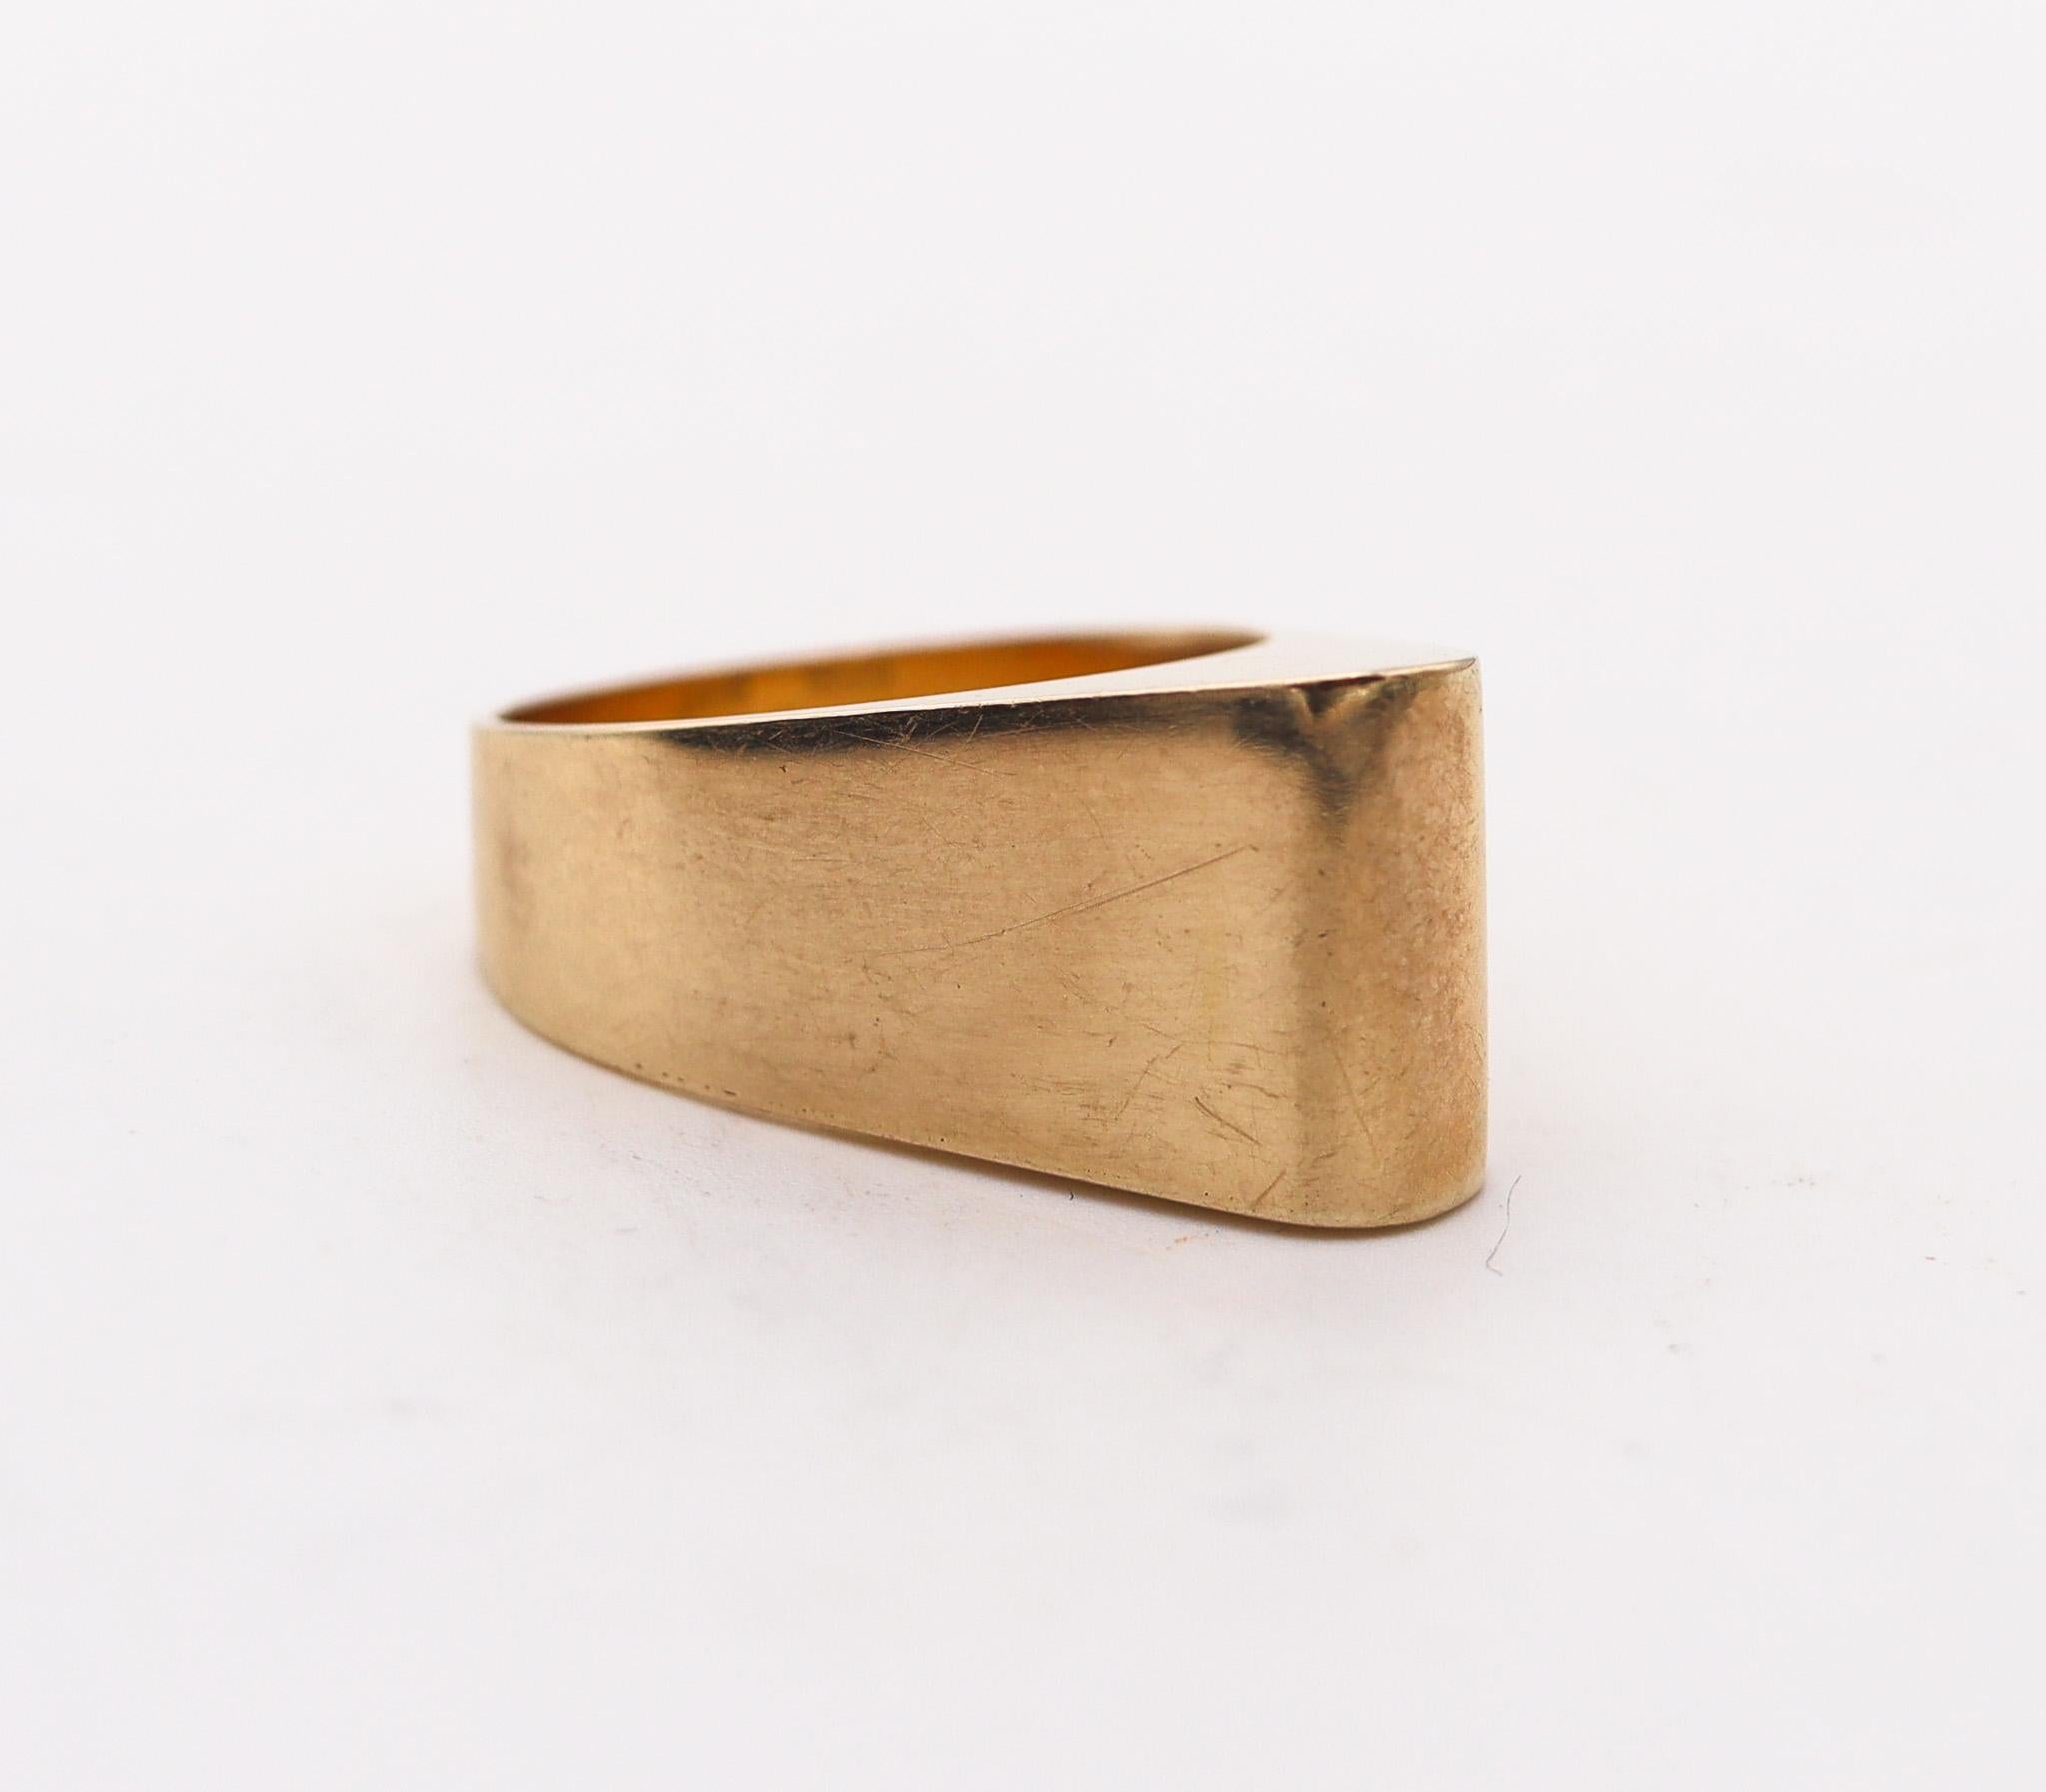 A sculptural ring designed by Jörgen Sandberg Odense.

An exceptional sculptural ring, created in Copenhagen Denmark by the goldsmith and designer Jörgen Sandberg Odense, back in the 1970. This beautiful Scandinavian ring has been designed in three